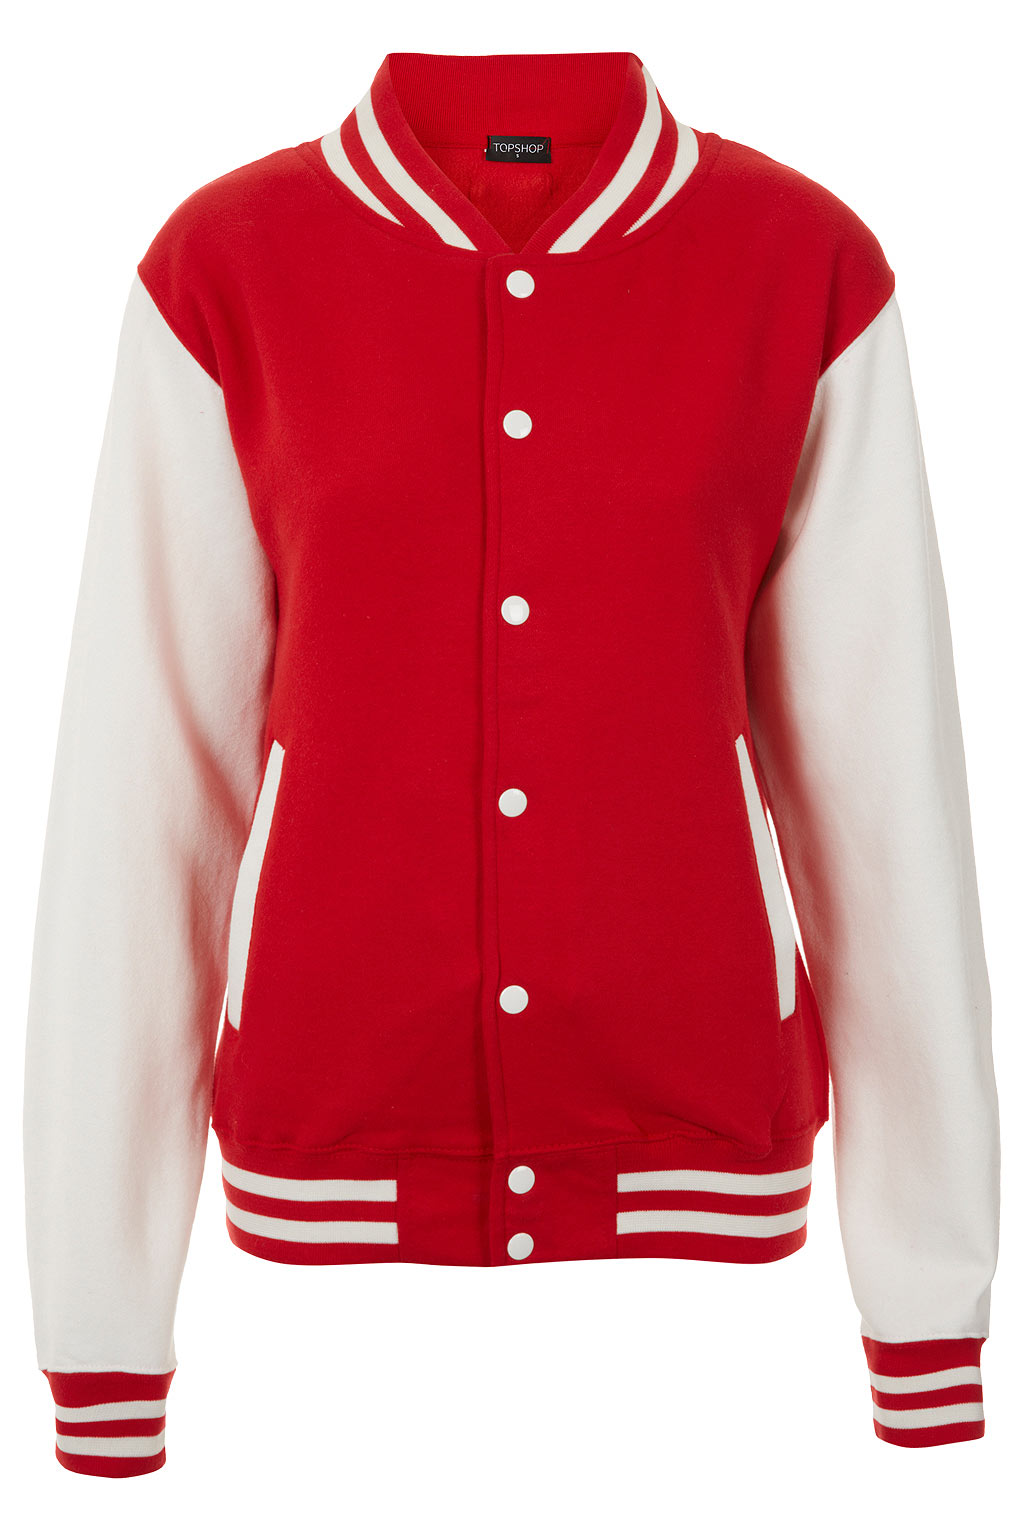 Topshop Plain Varsity Jersey Bomber Jacket in Red | Lyst